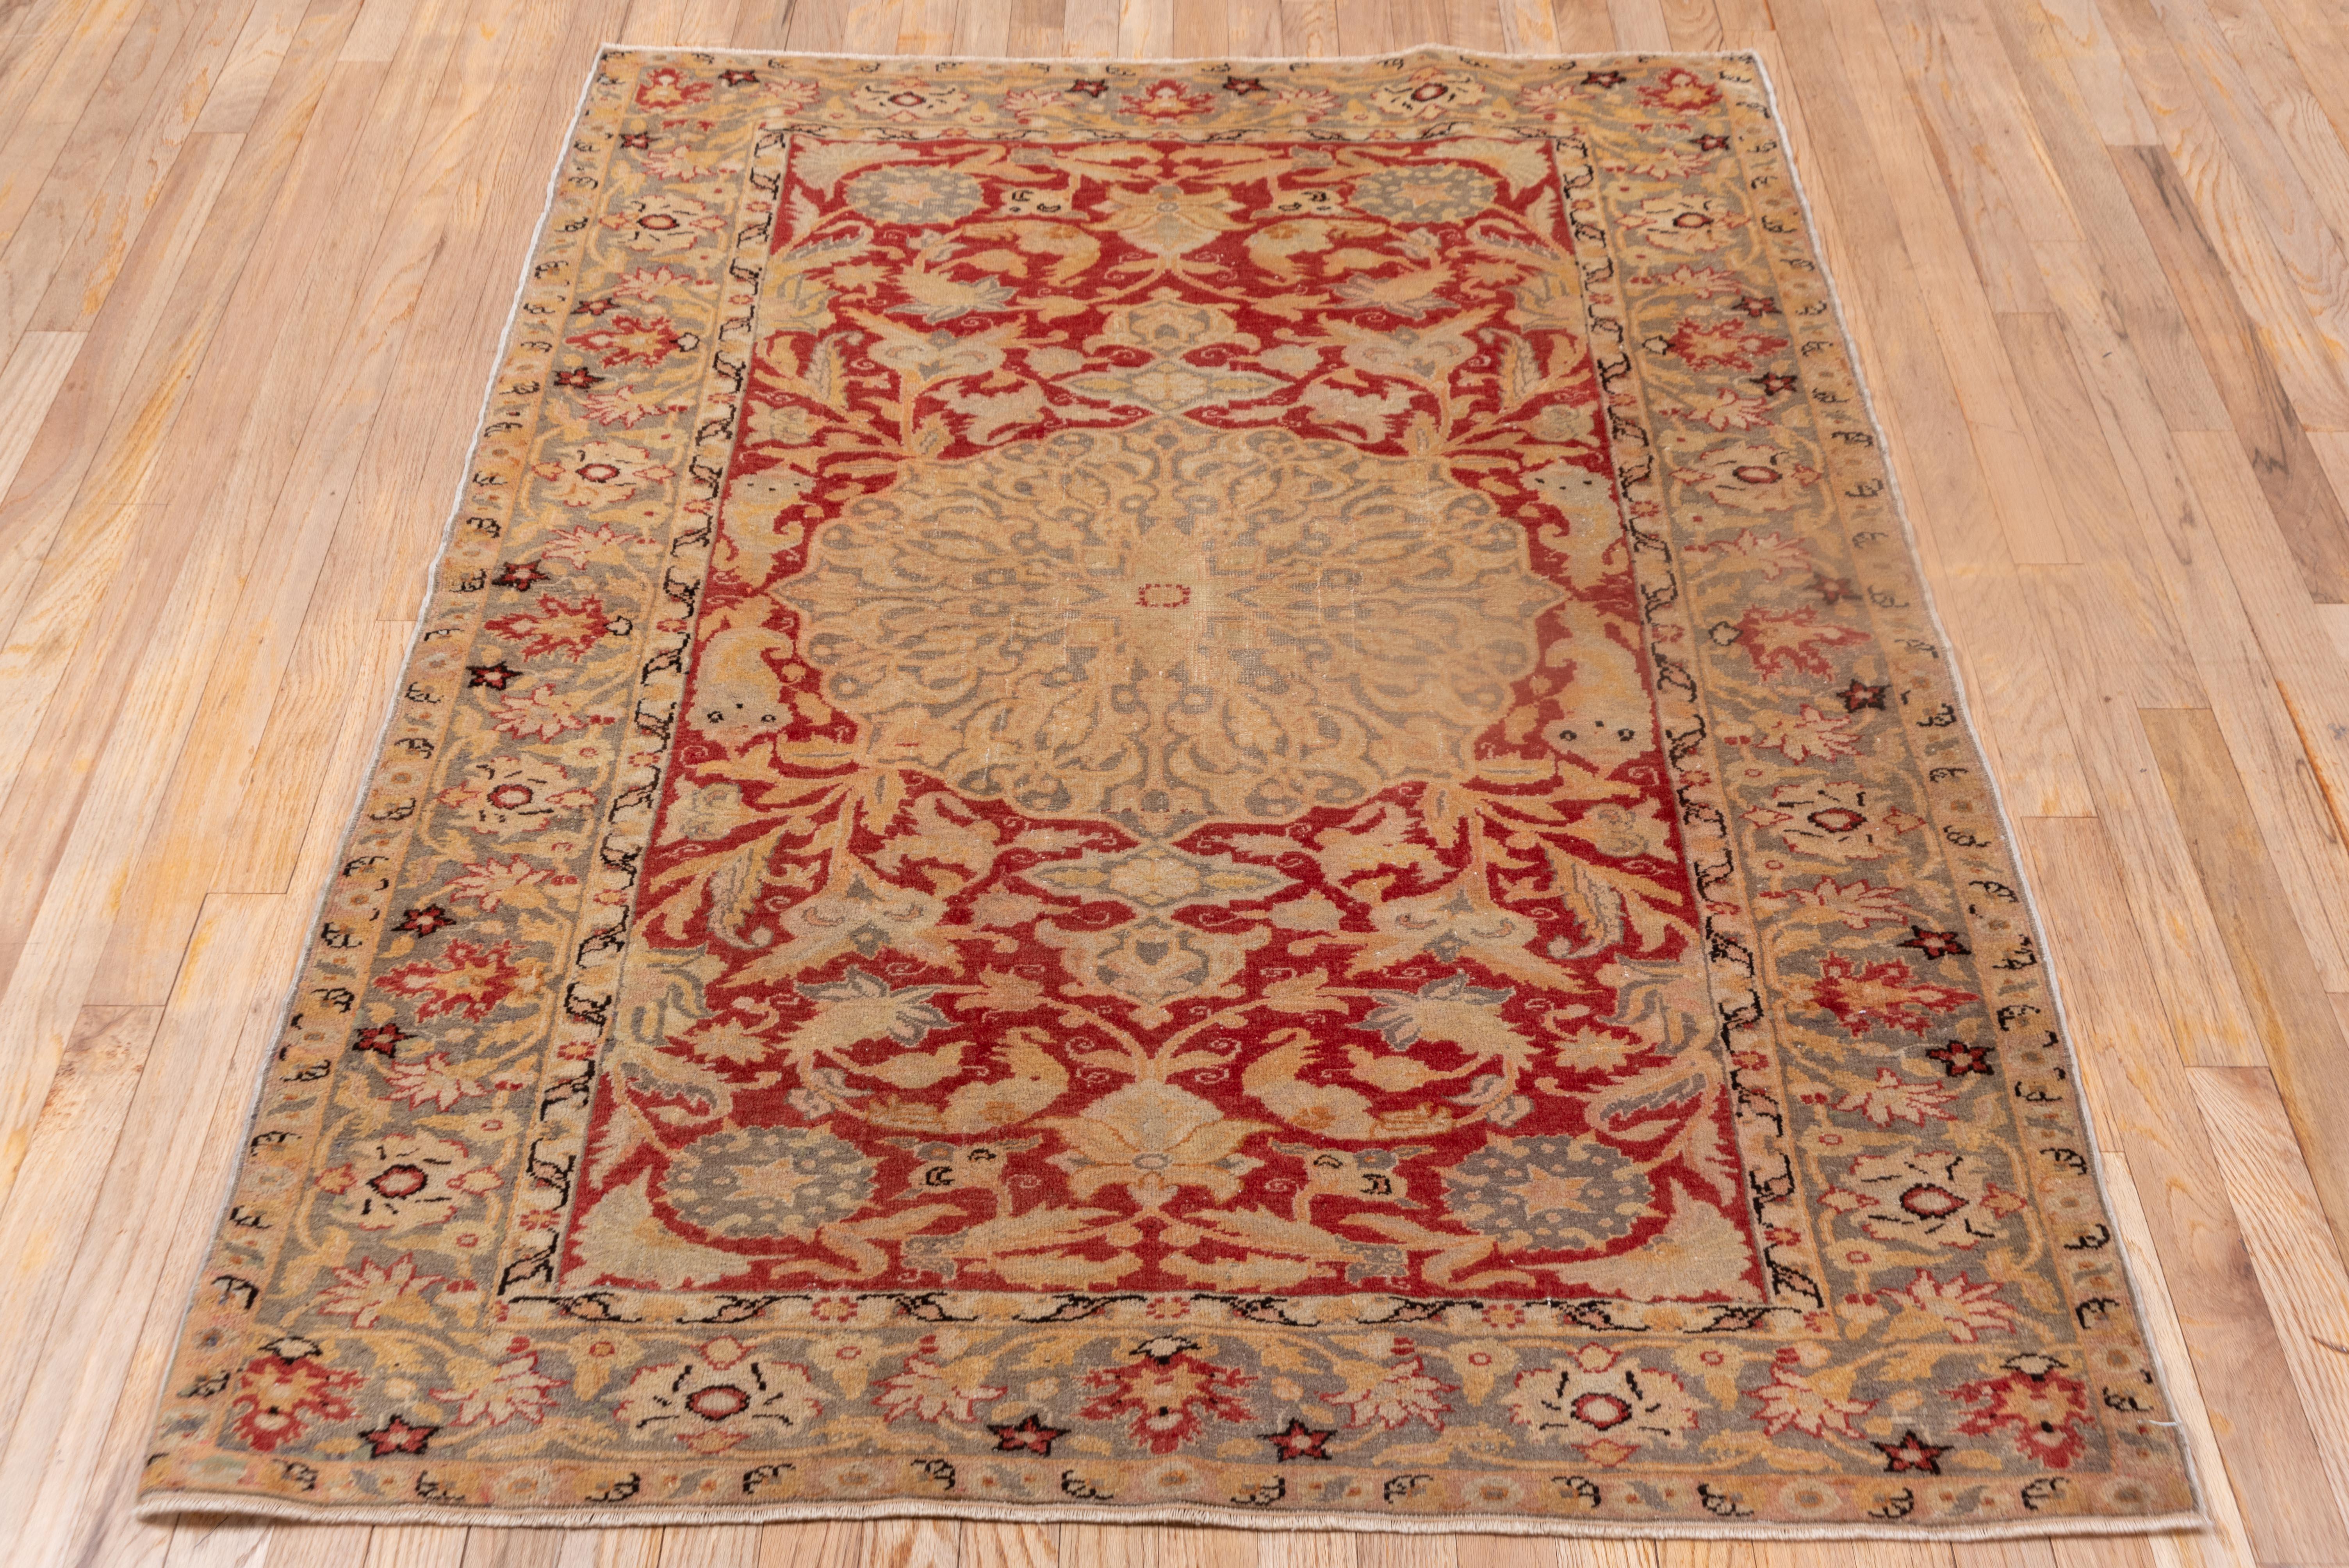 Royal Red and Egyptian Sand Tan, Center Medallion 1930s Antique Kaisary Rug For Sale 2